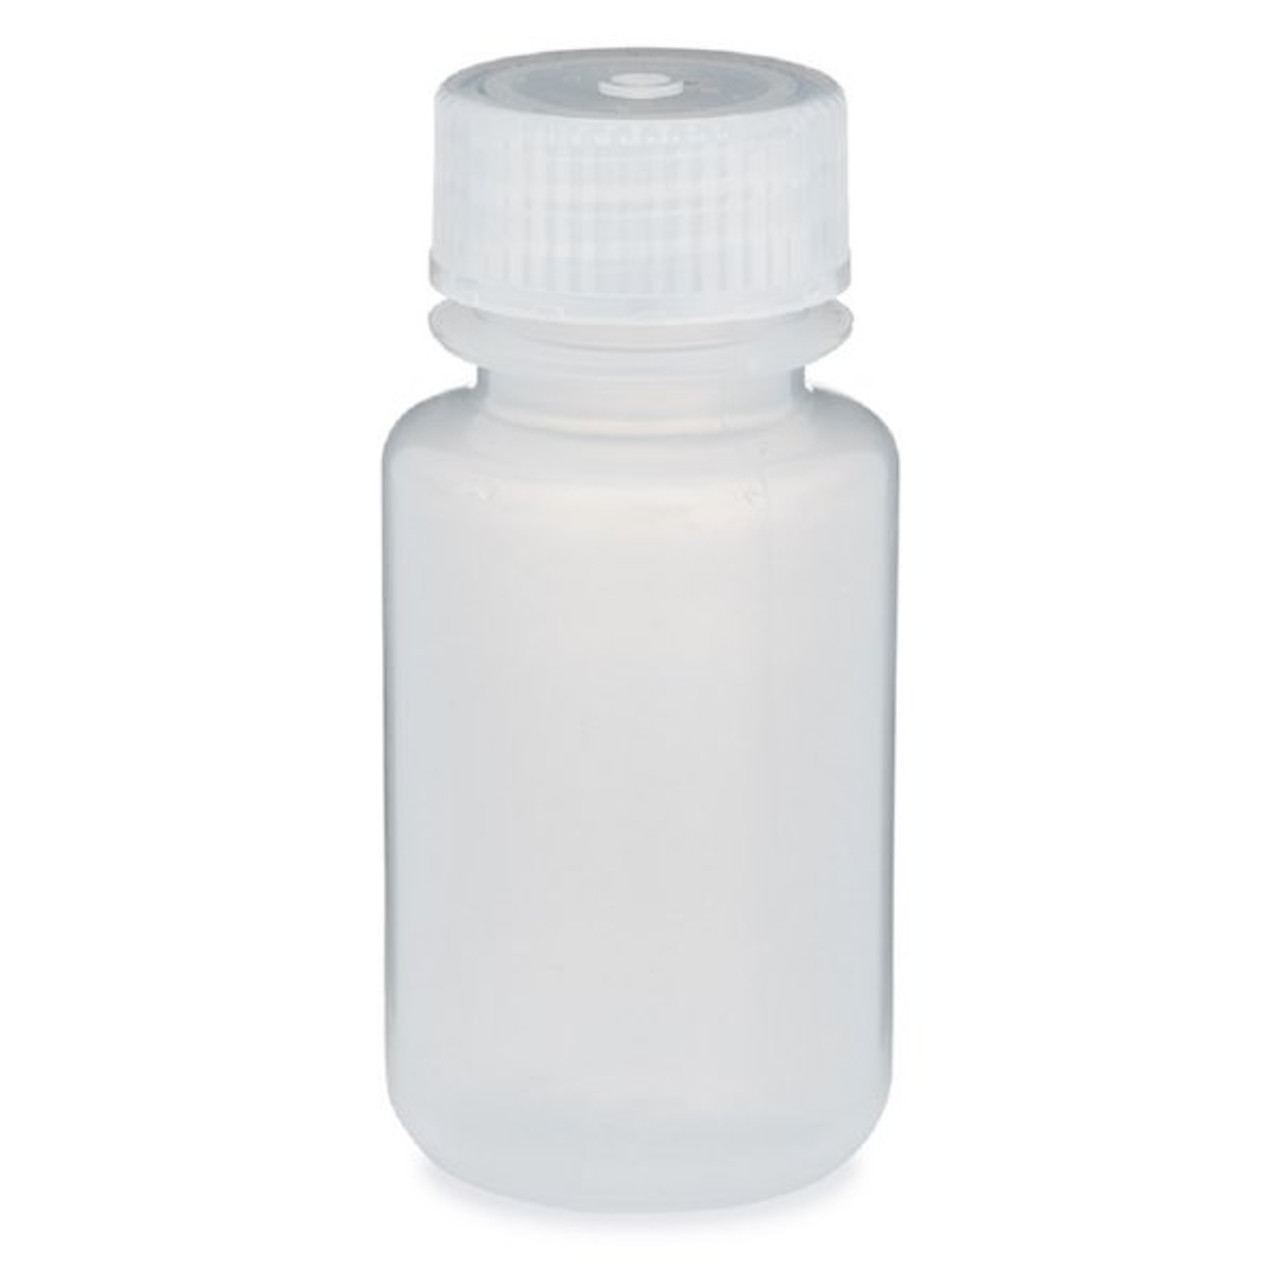 60 Pack Small Plastic Vials with Caps 2ml Lab Vials Screw Top Vials  Cryogenic Vial Lab Frozen Test Tubes Small Vial Tub Container for  Laboratory